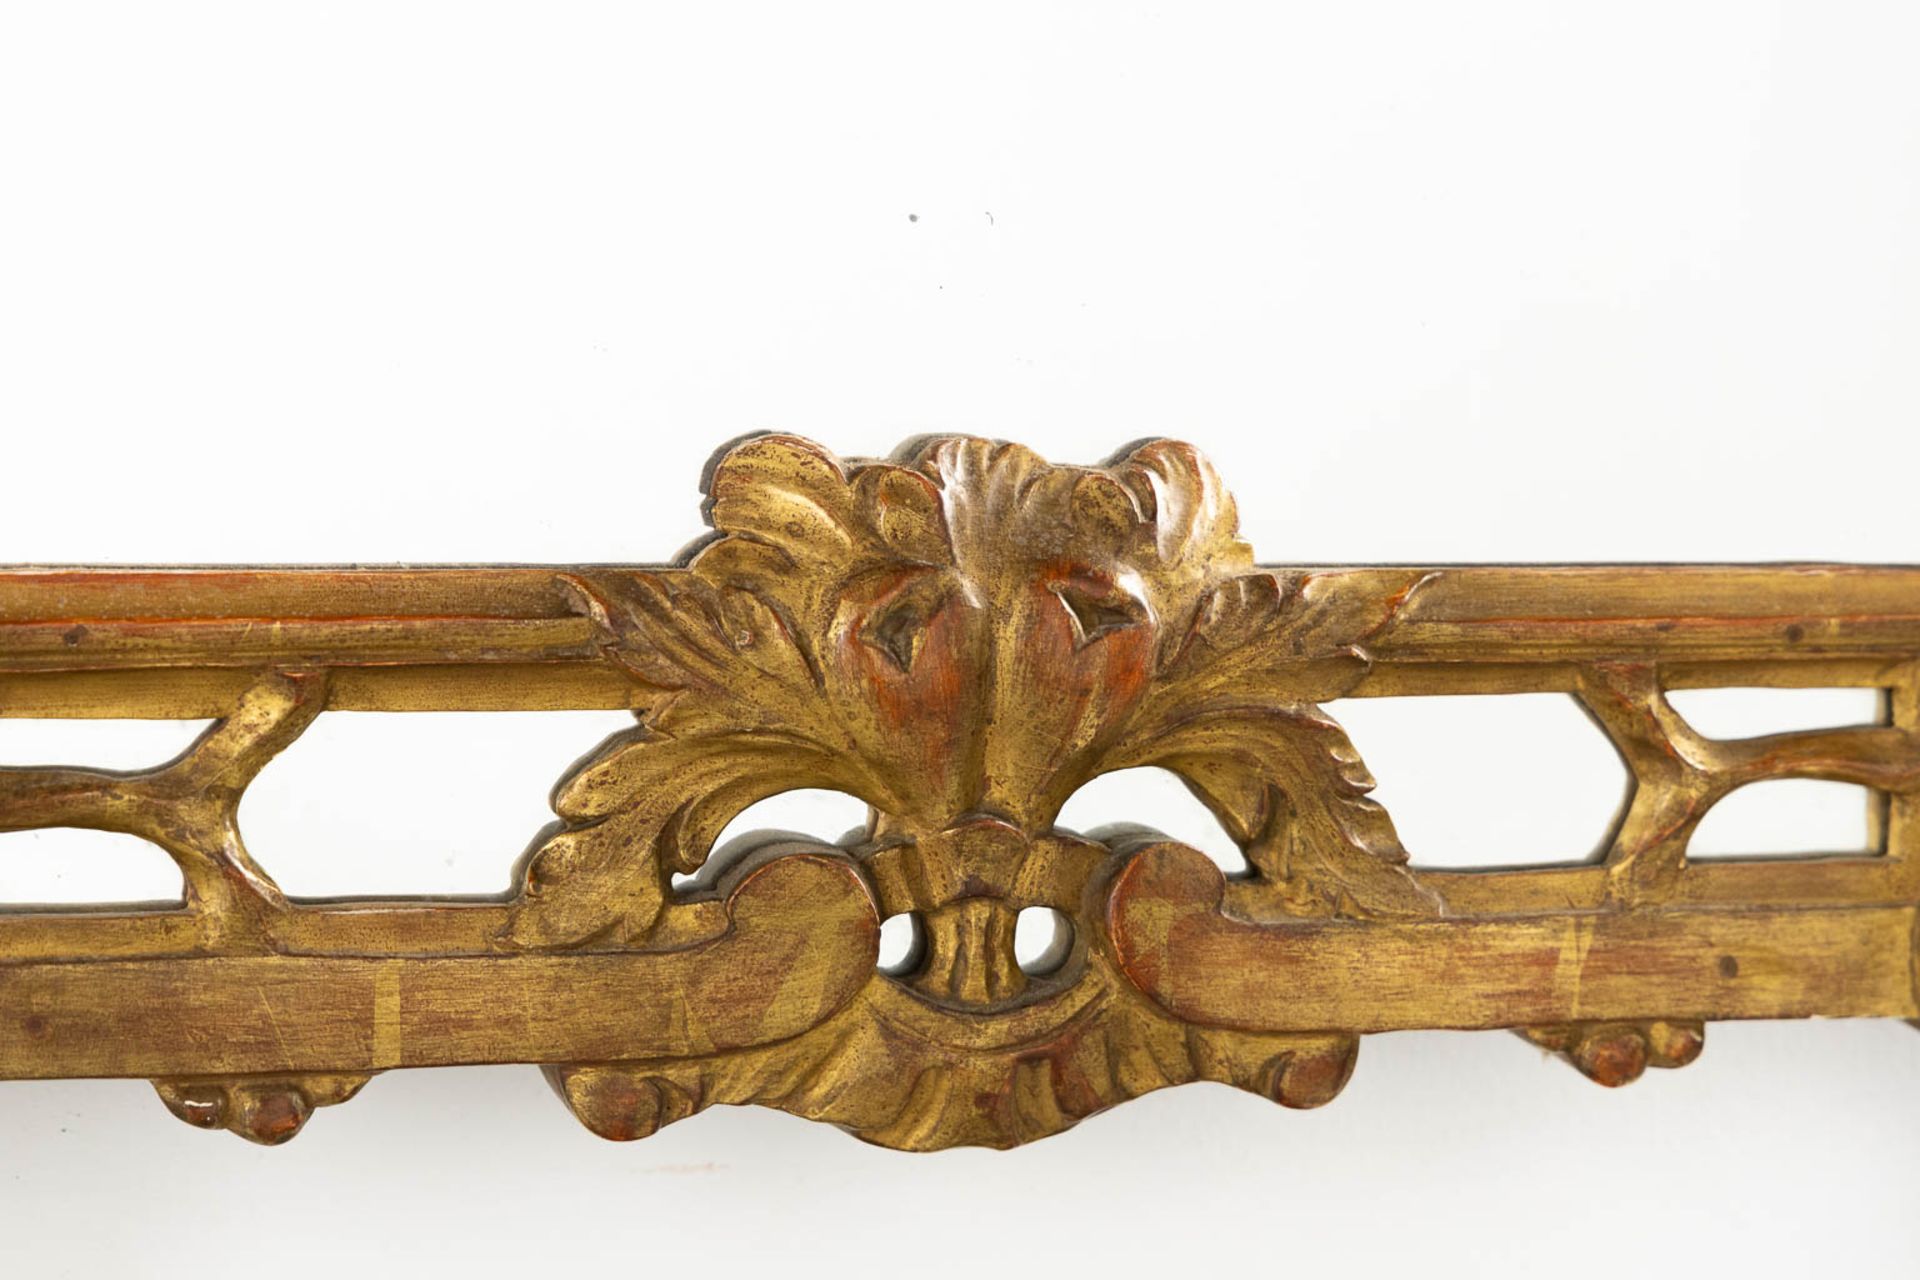 An antique, wood-sculptured and gilt mirror, France, 20th C. (W:74 x H:130 cm) - Image 7 of 7